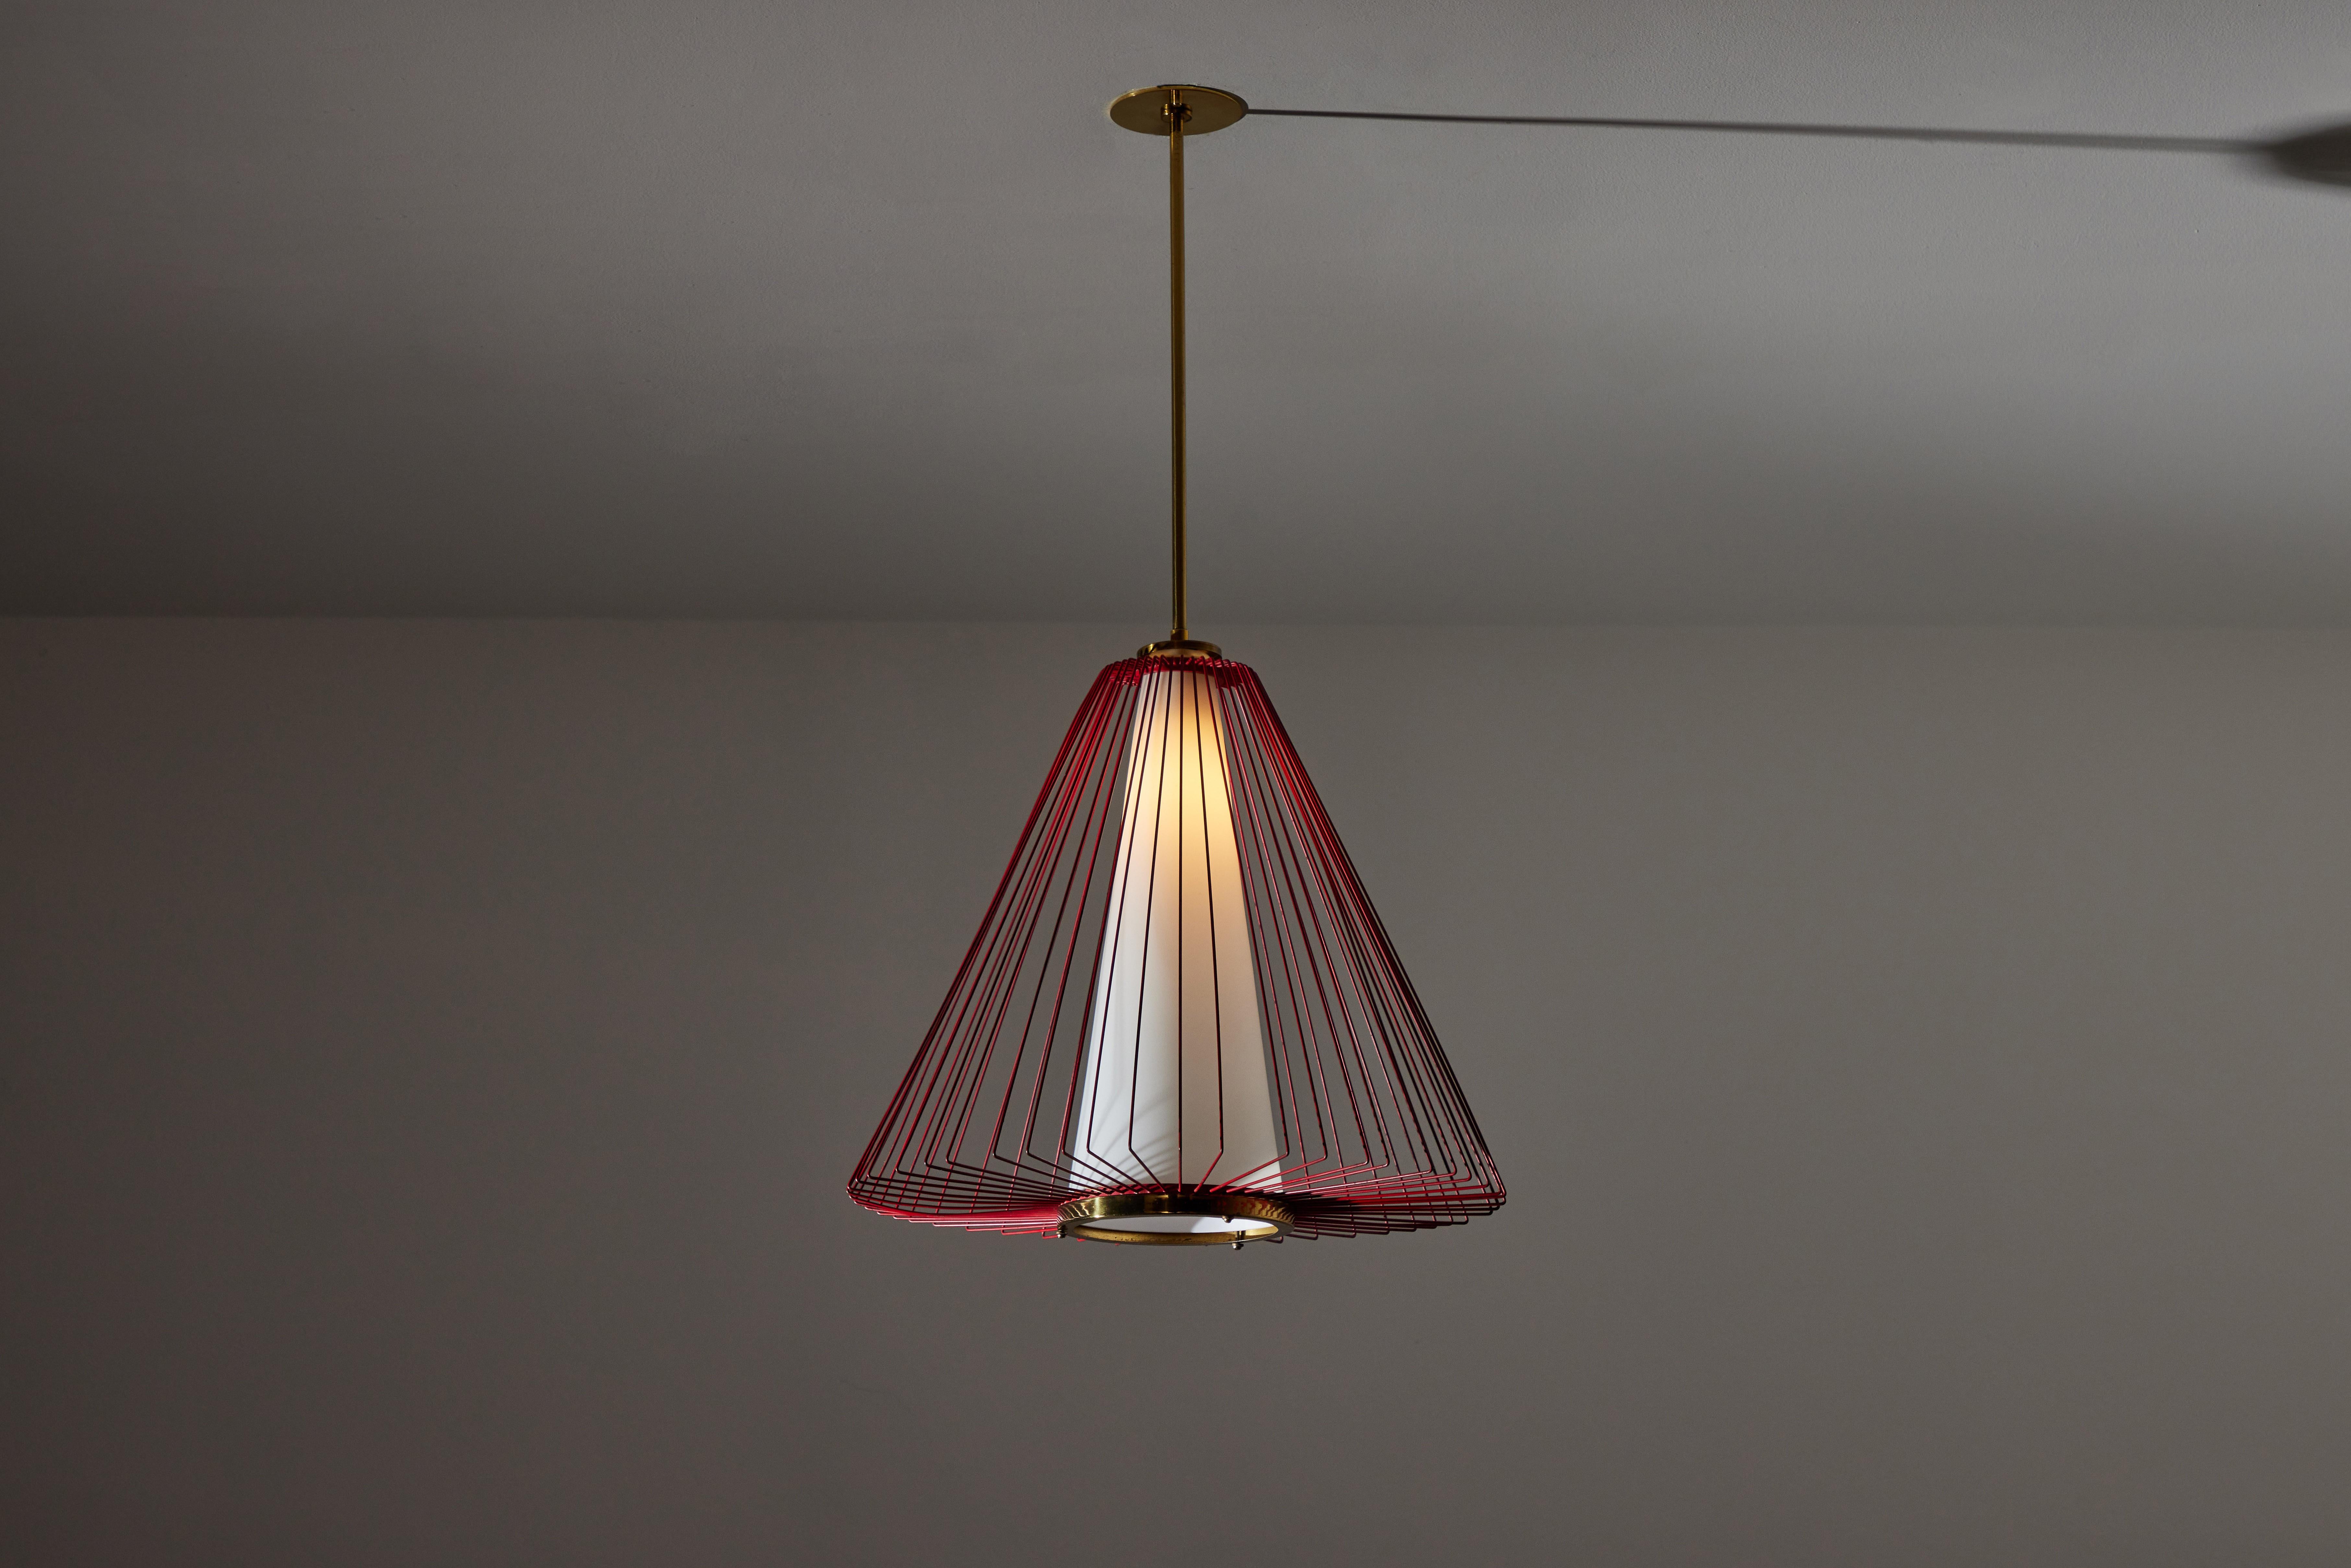 Pendant in the style of Arredoluce. Made in Italy, circa 1950's. Enameled metal armature, brushed satin glass diffuser. Custom brass backplate. Rewired for U.S. standards. We recommend one E27 75w maximum bulb. Bulbs provided as a one time courtesy.